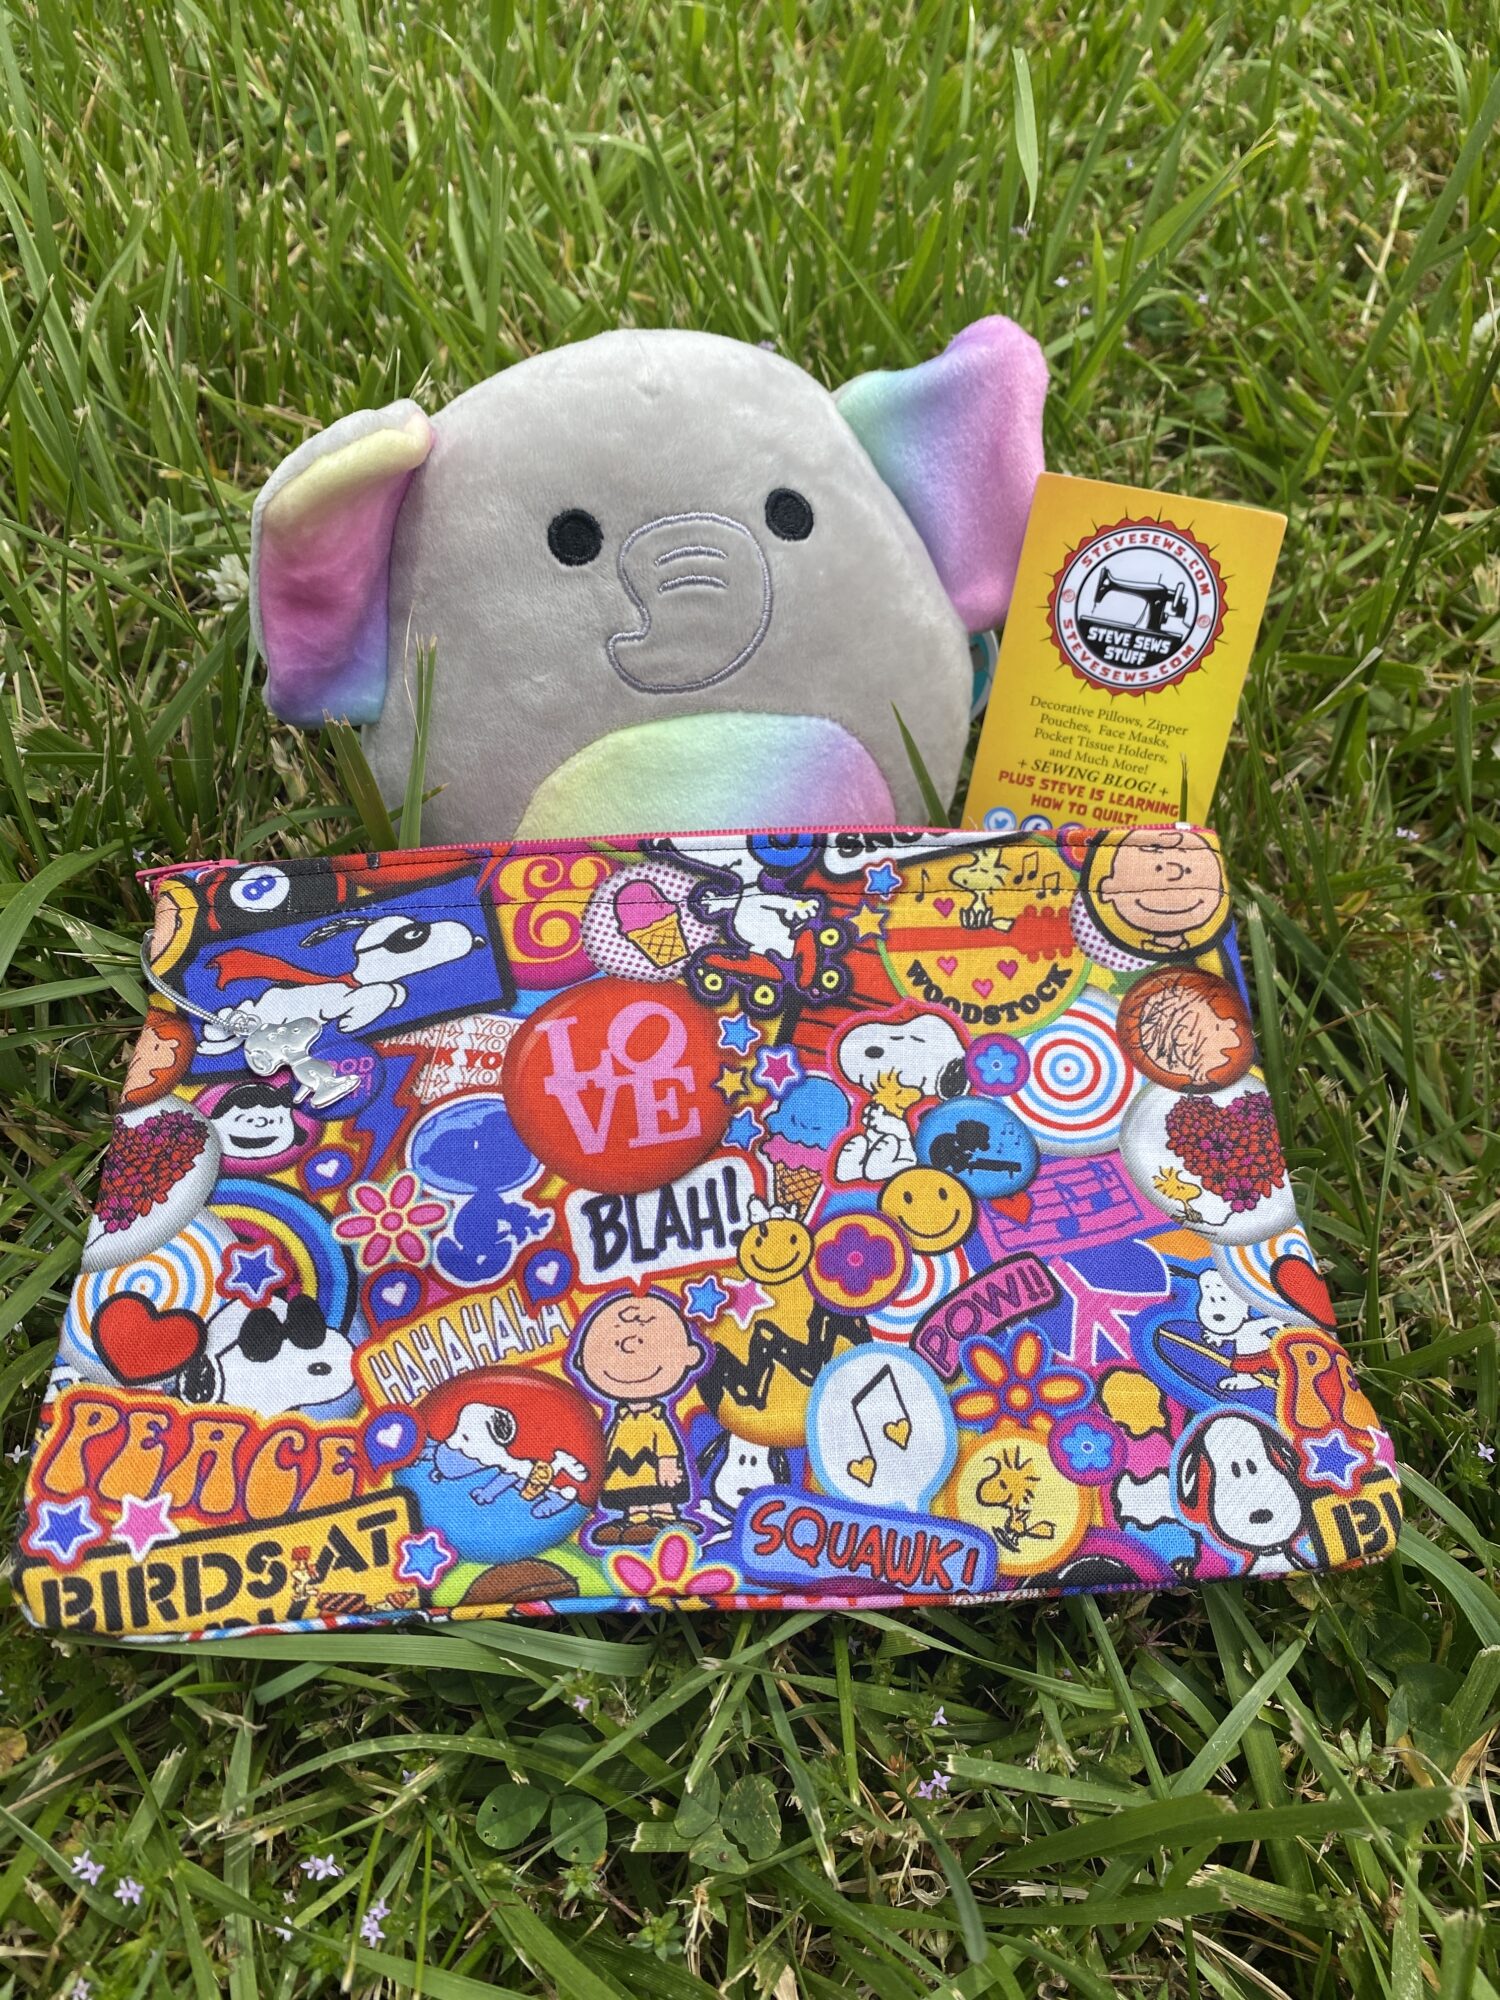 Meet Mila our newest loveee (Squishmallow). 
She is showing off Retro Snoopy Zipper Pouch – a very colorful retro-looking pocket tissue holder featuring some of the Peanuts Gang along with Snoopy. With a Snoopy Zipper Pull!